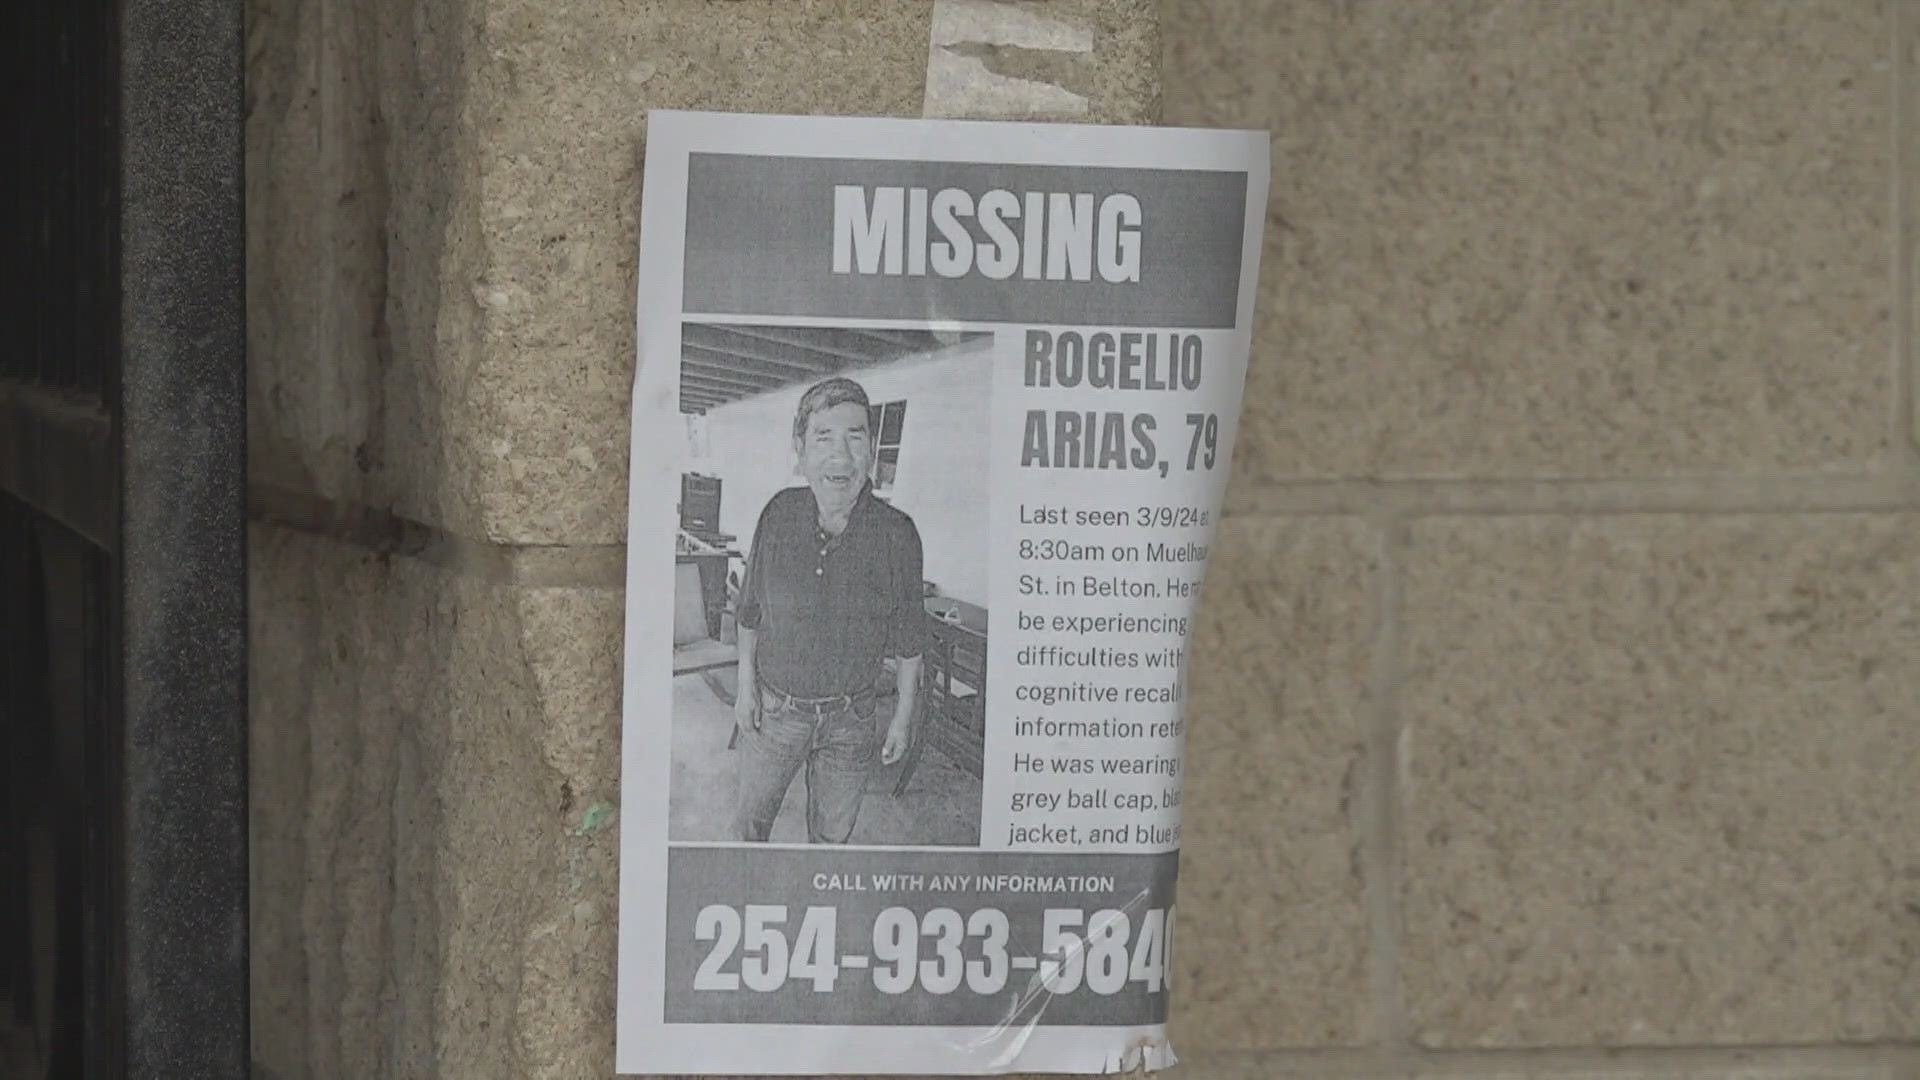 Rogelio Arias, 79, has been missing since Saturday, March 9, and was last seen on Muelhause Street in Belton.